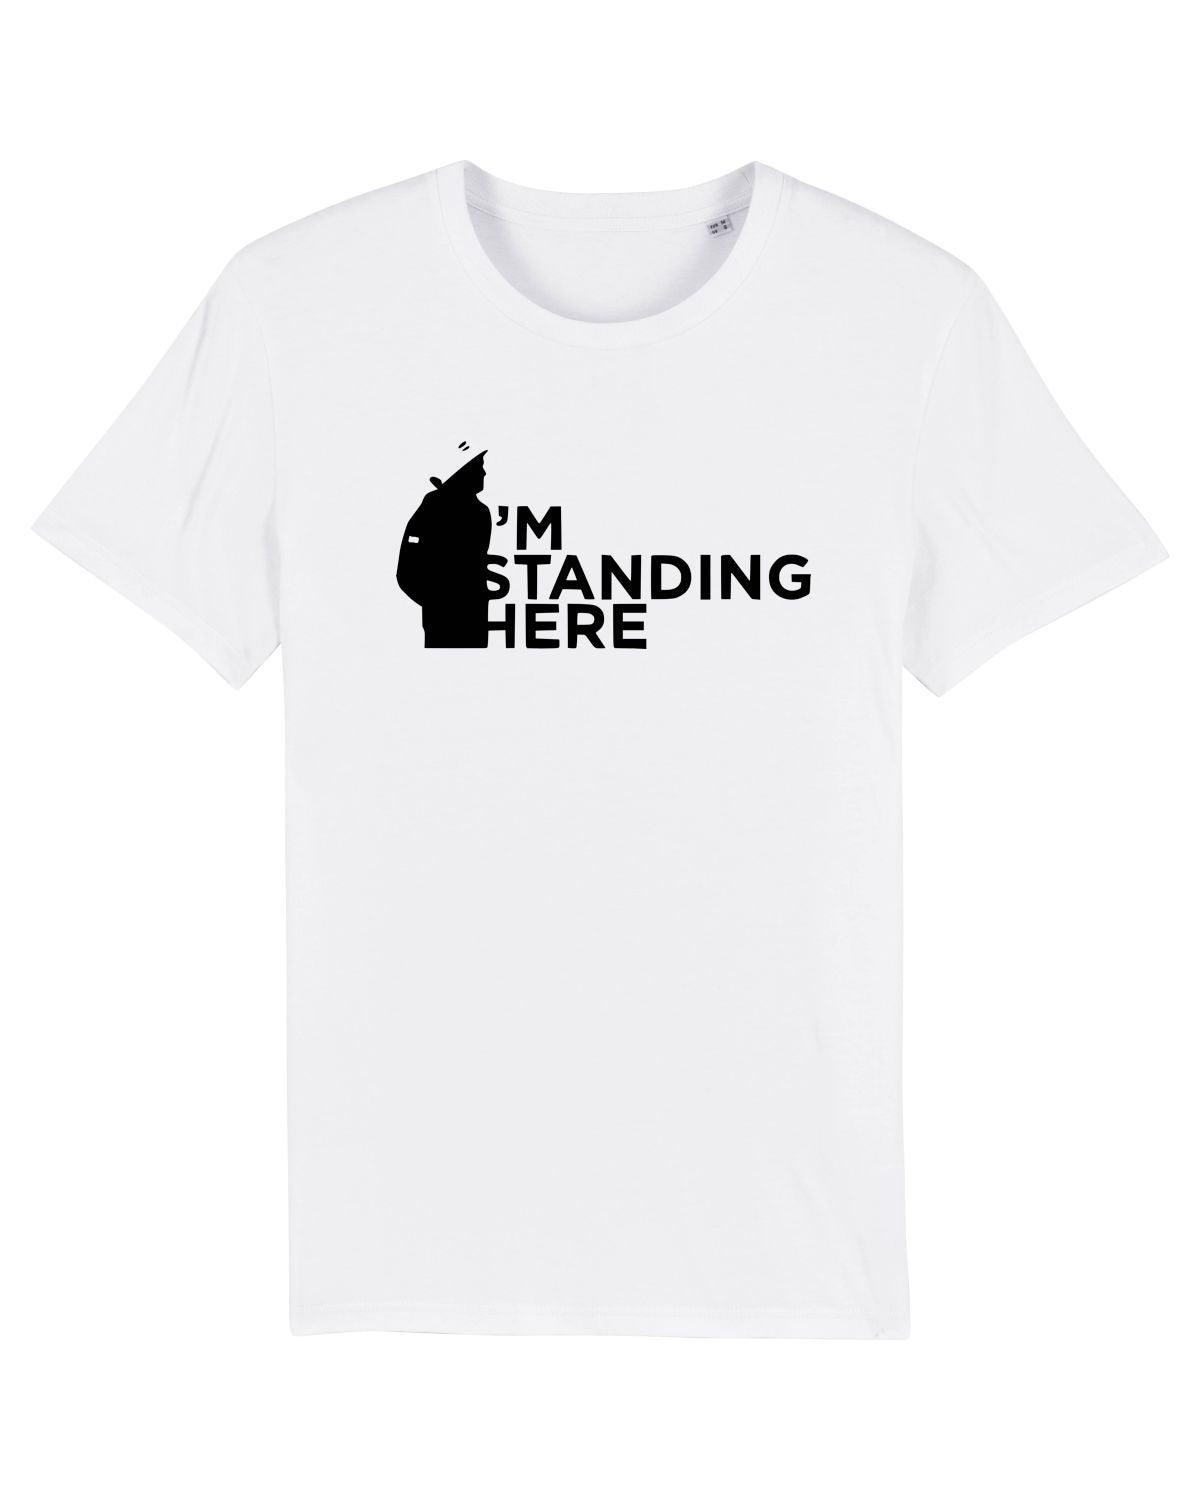 I'M STANDING HERE: T-Shirt in NUFC Colours Inspired by Terrace Culture (4 Colour Options) - SOUND IS COLOUR